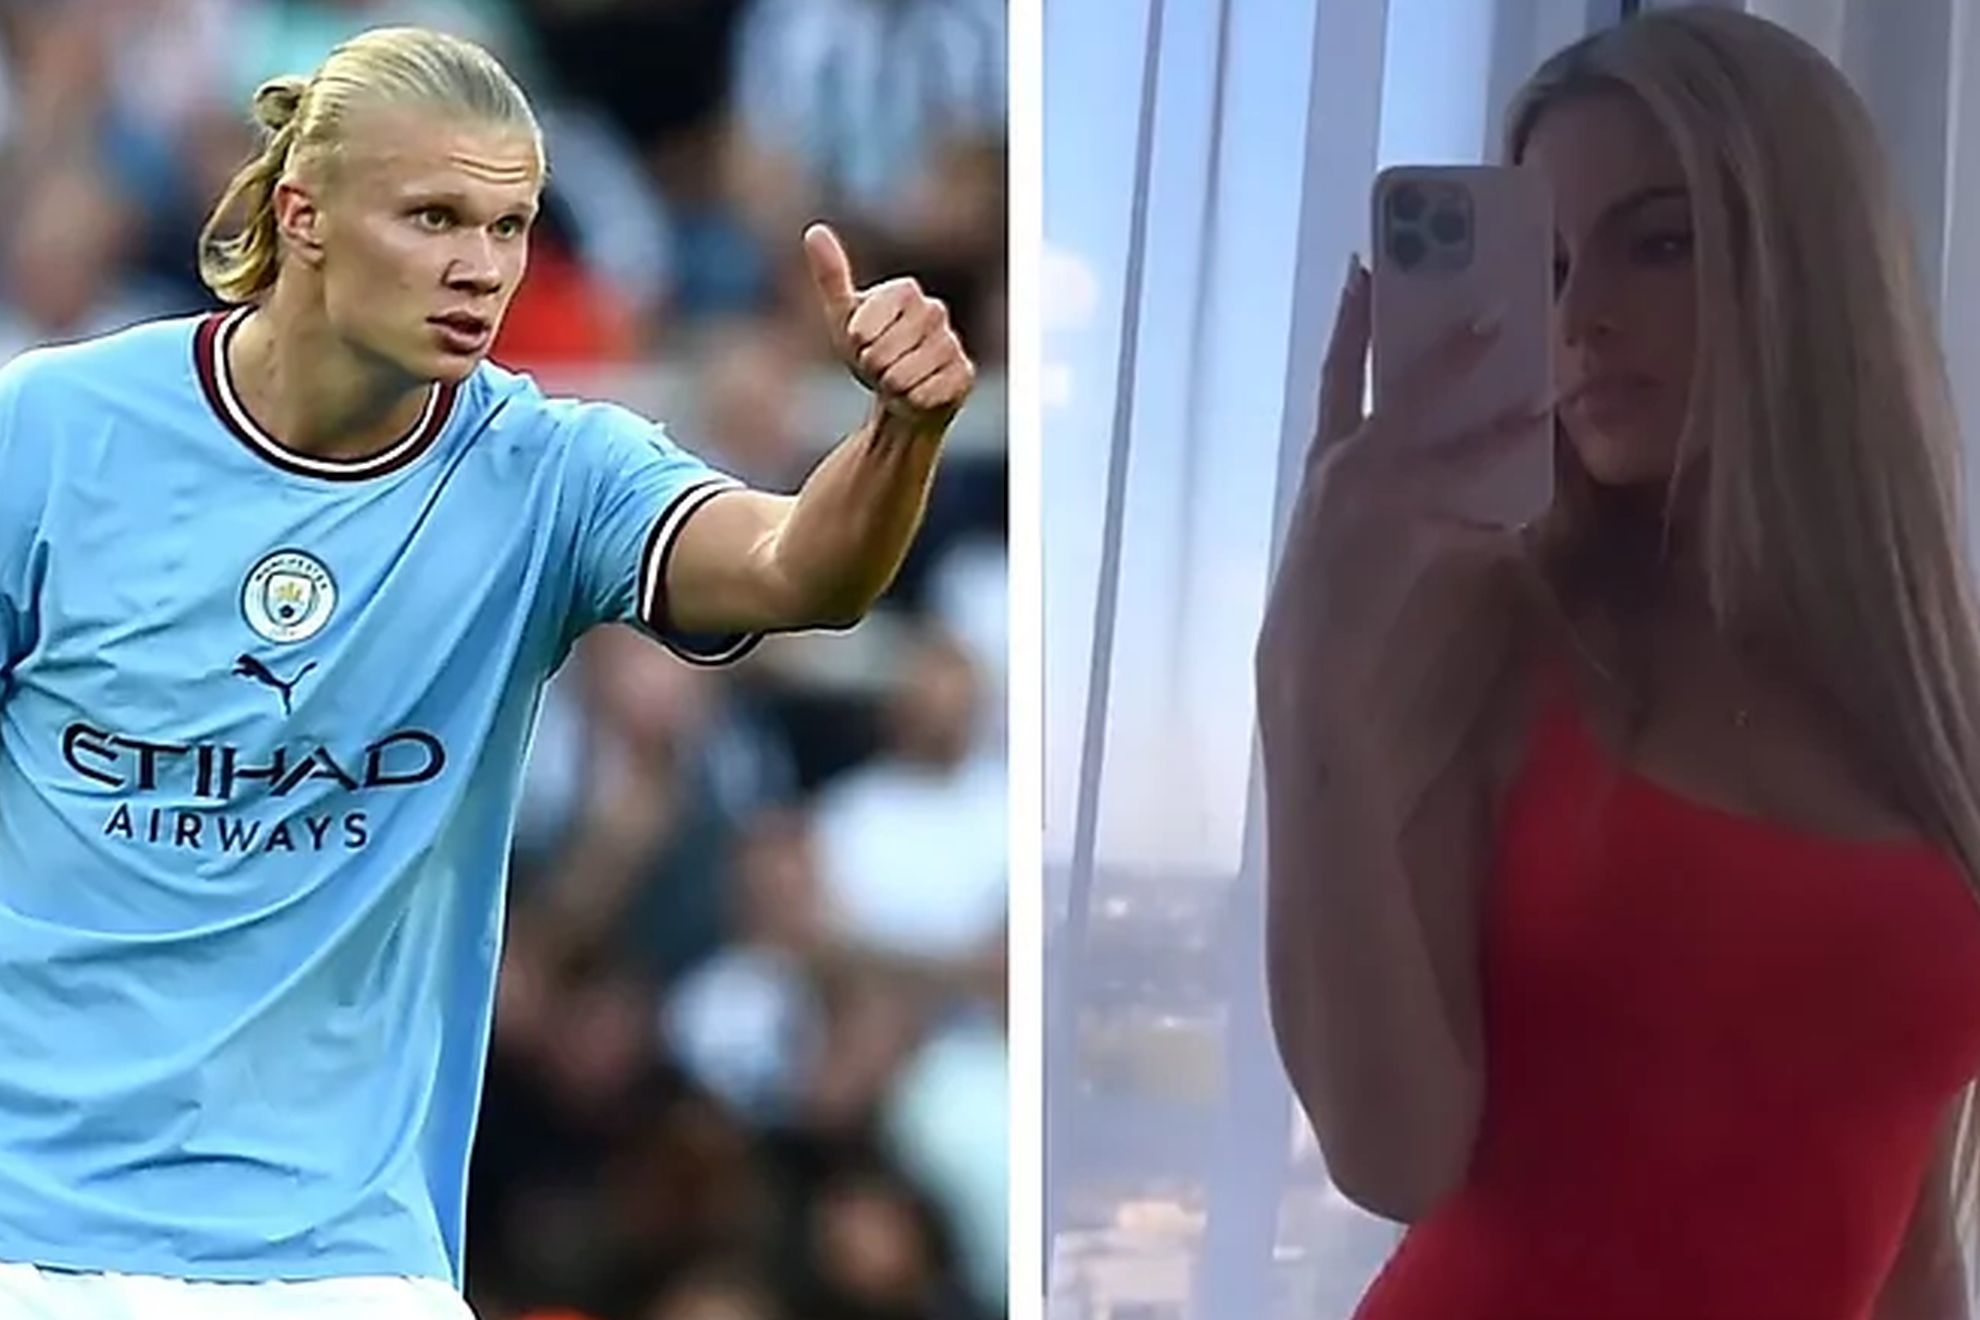 Guardiola's daughter, Erling Haaland and a surprise marriage proposal